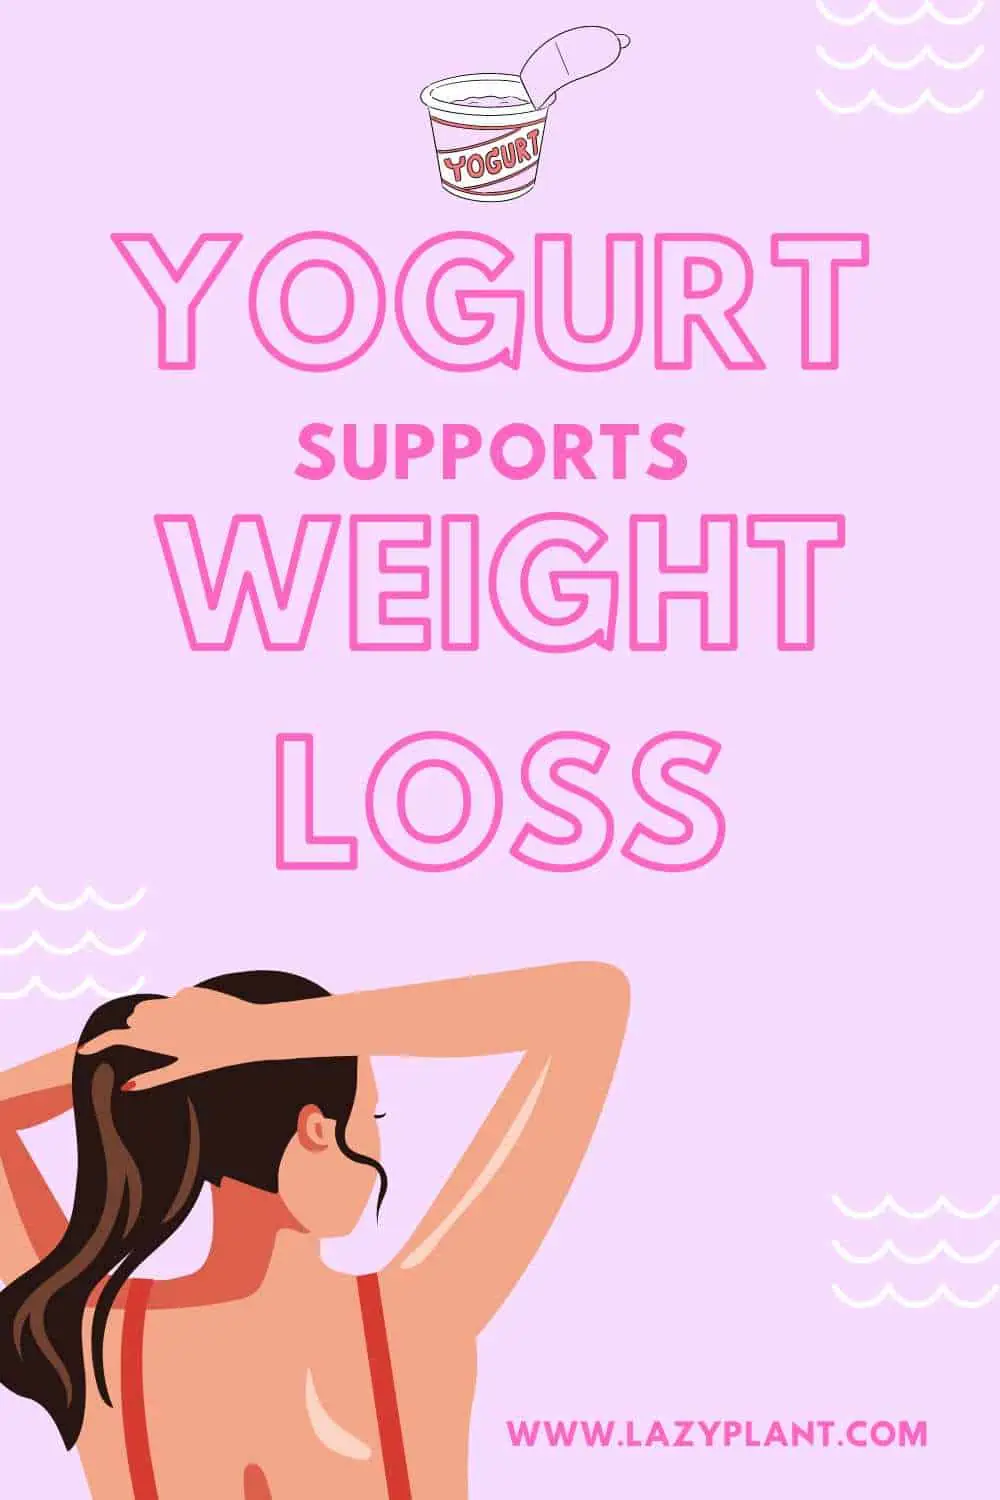 How can you eat yogurt at dinner in a manner that promotes weight loss?